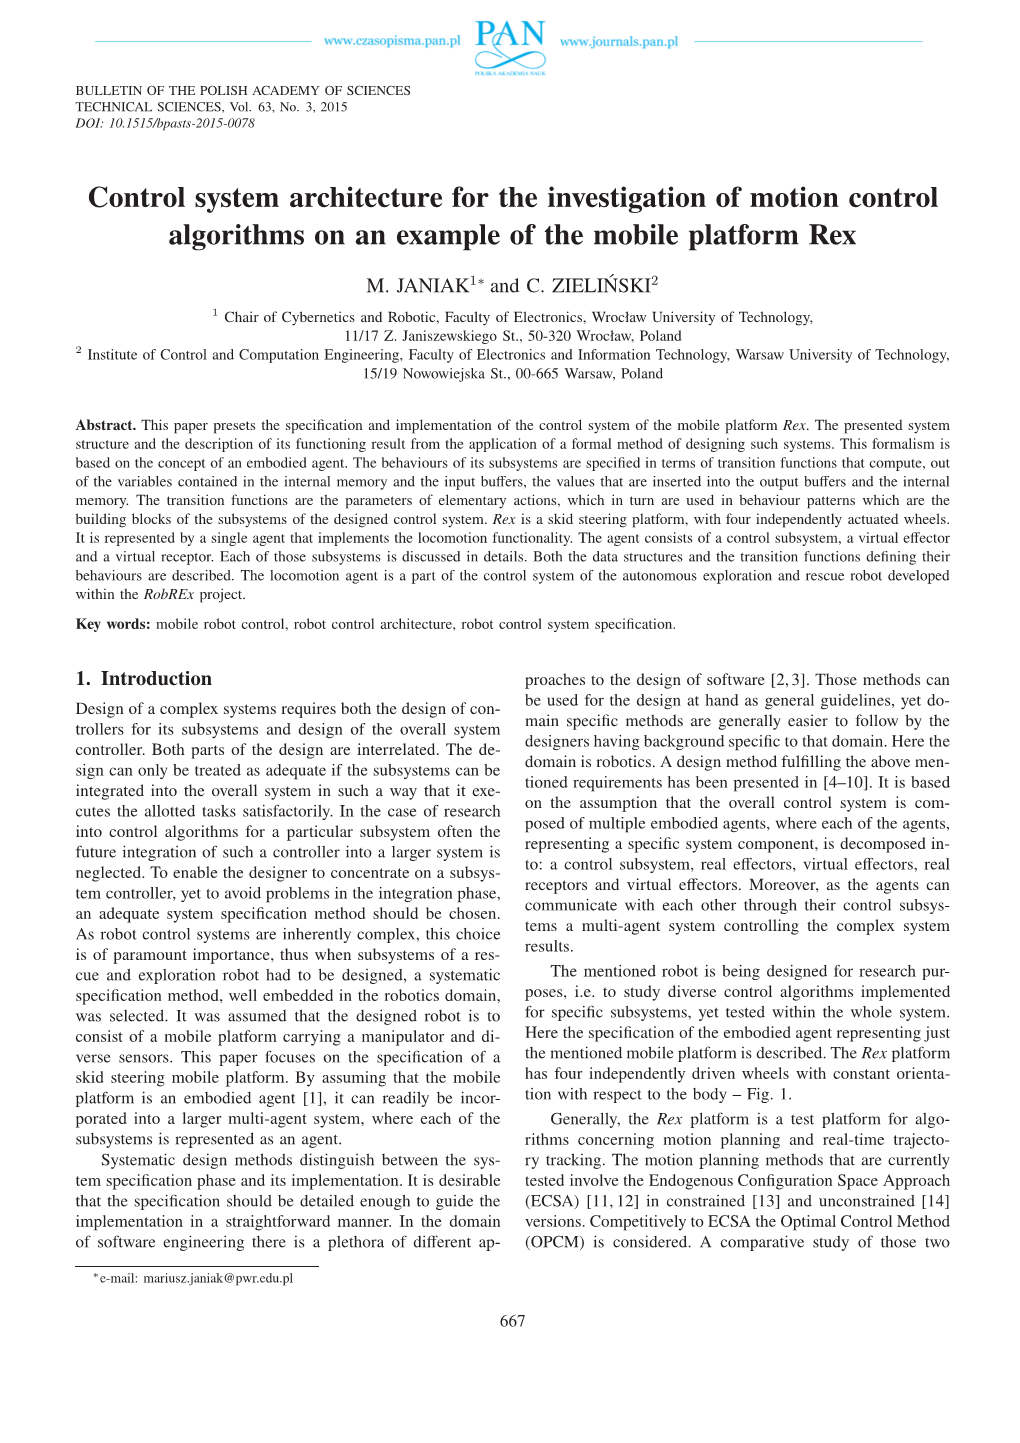 Control System Architecture for the Investigation of Motion Control Algorithms on an Example of the Mobile Platform Rex